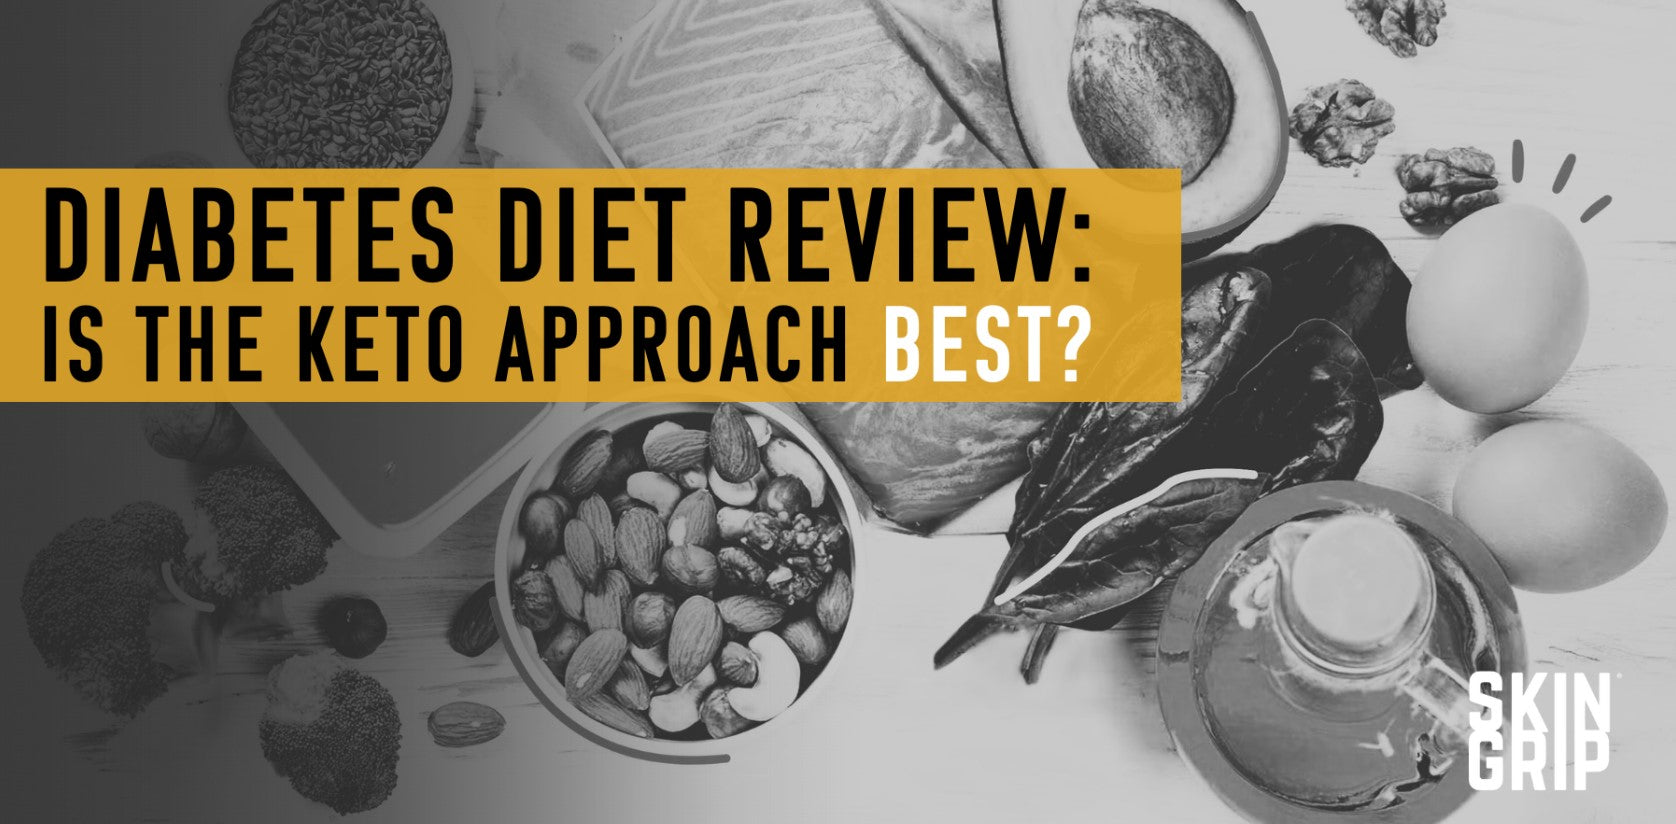 Diabetes Diet Review: Is the Keto Approach Best?